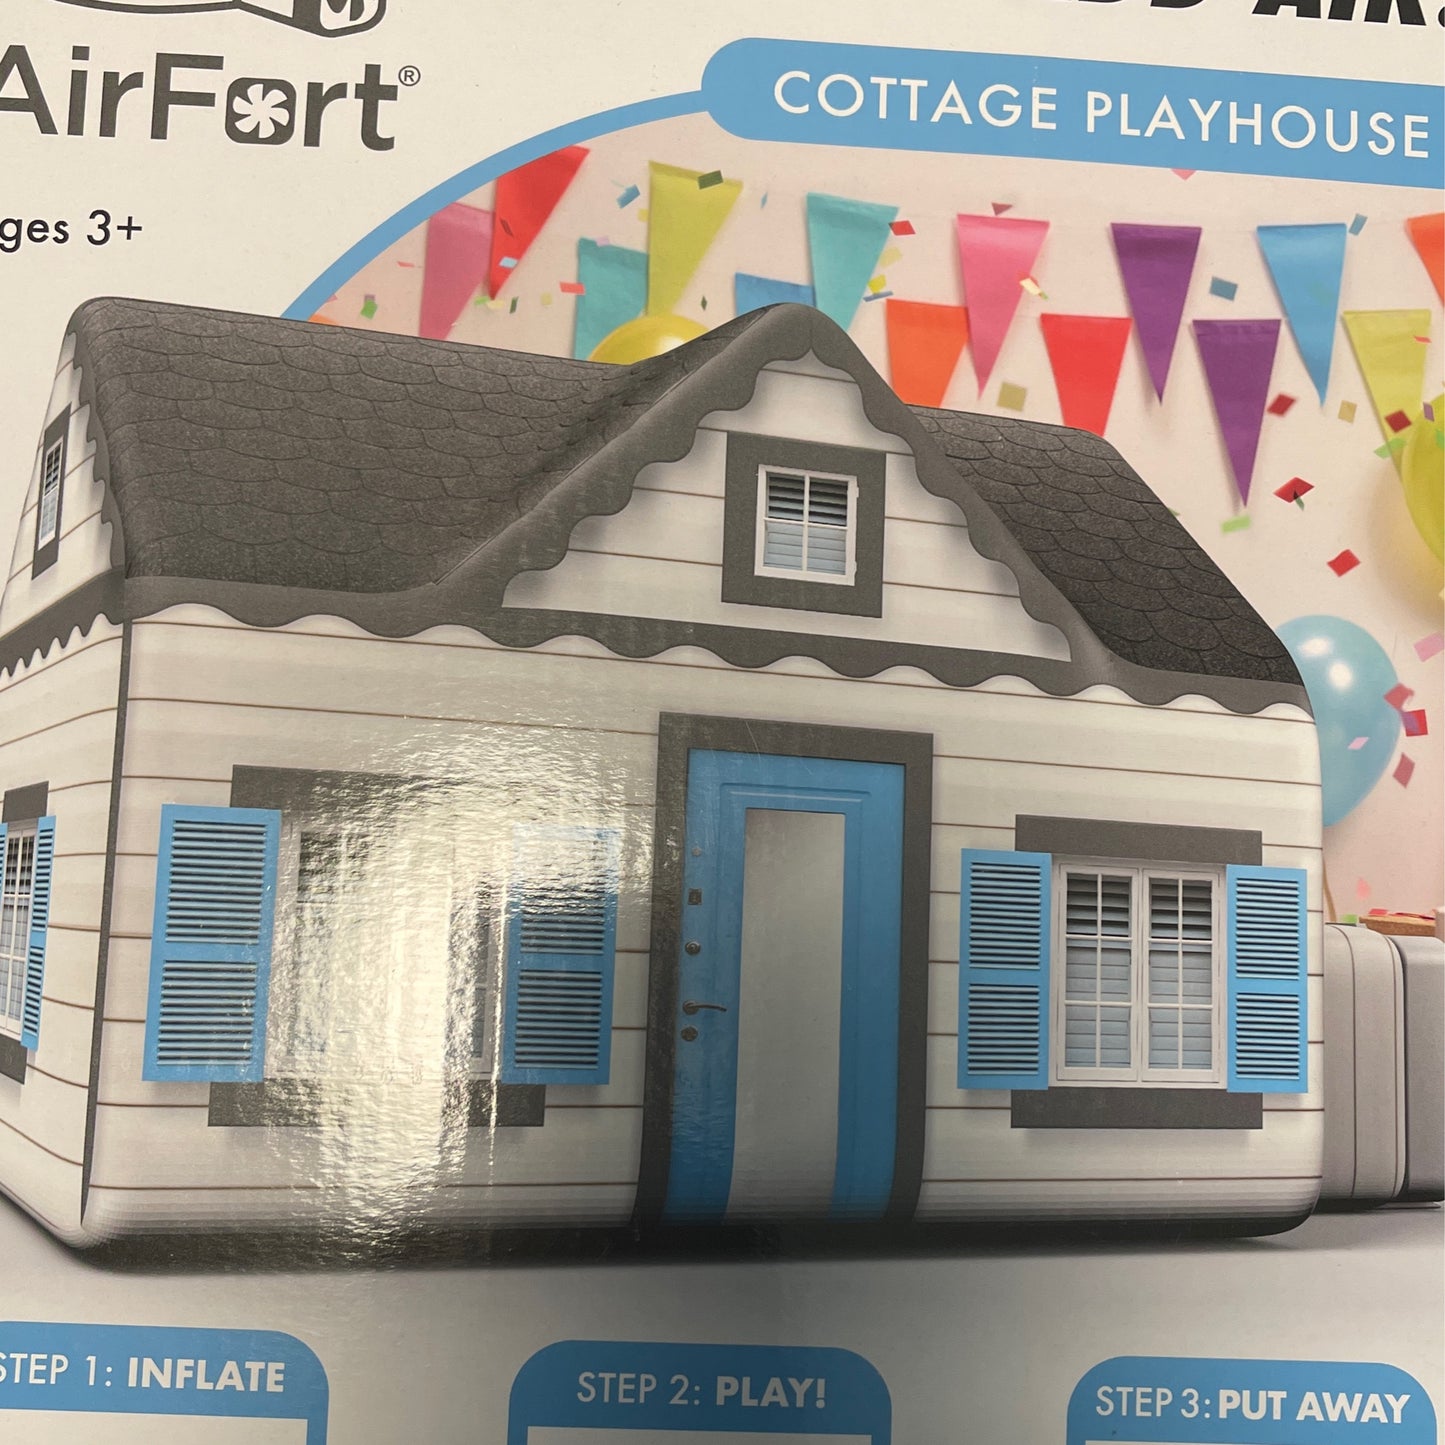 The Original Airfort: Cottage Playhouse